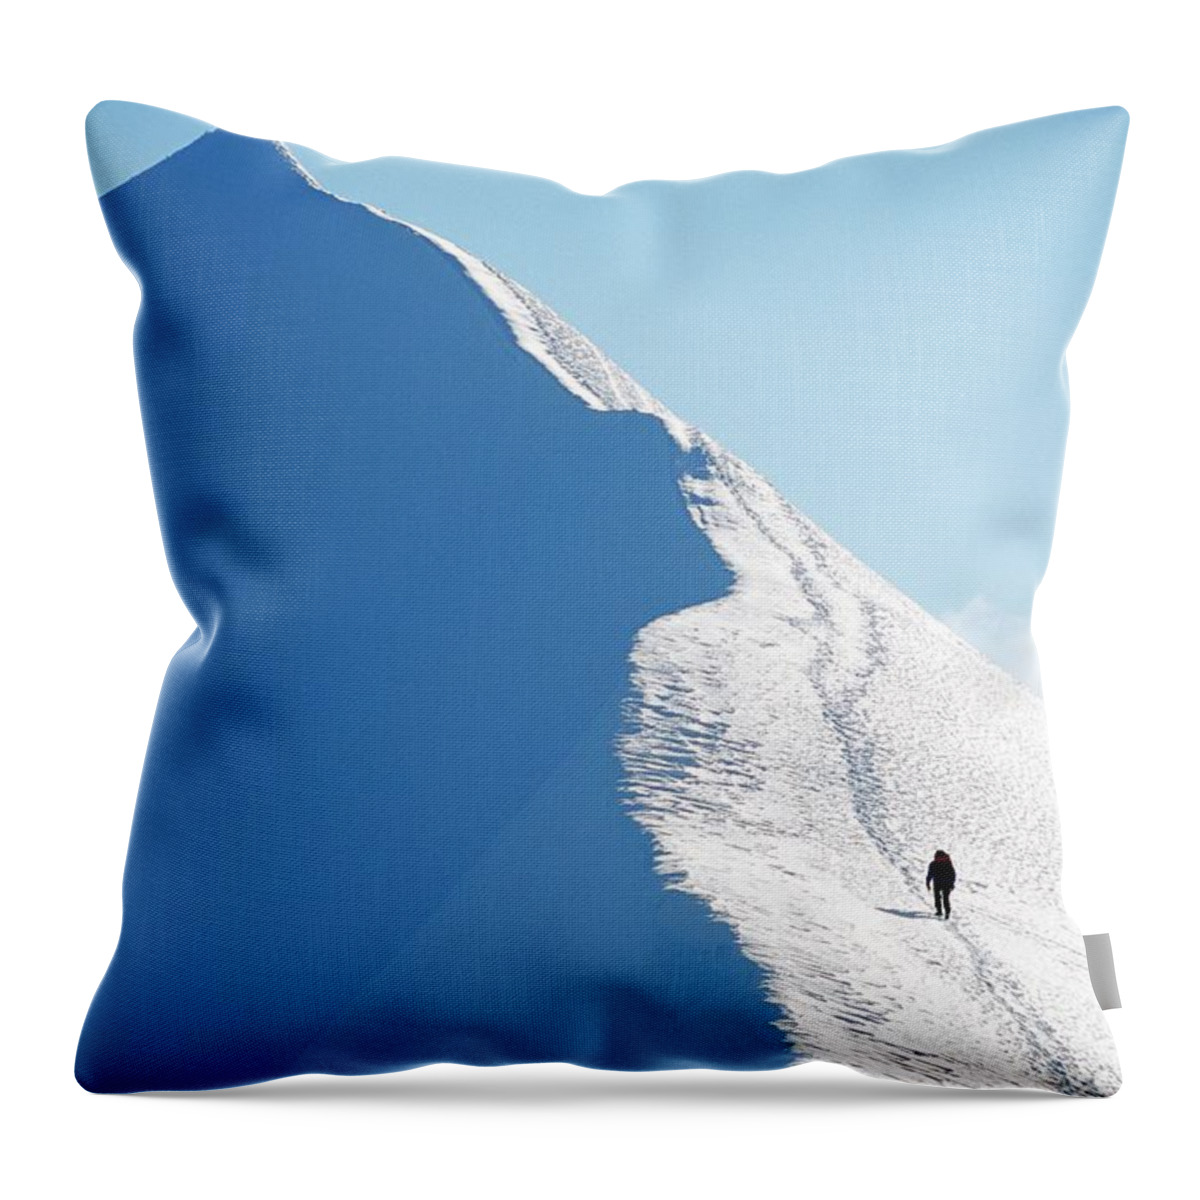 Snow Throw Pillow featuring the photograph A Person Hiking On A Mountain Peak by Hakan Hjort